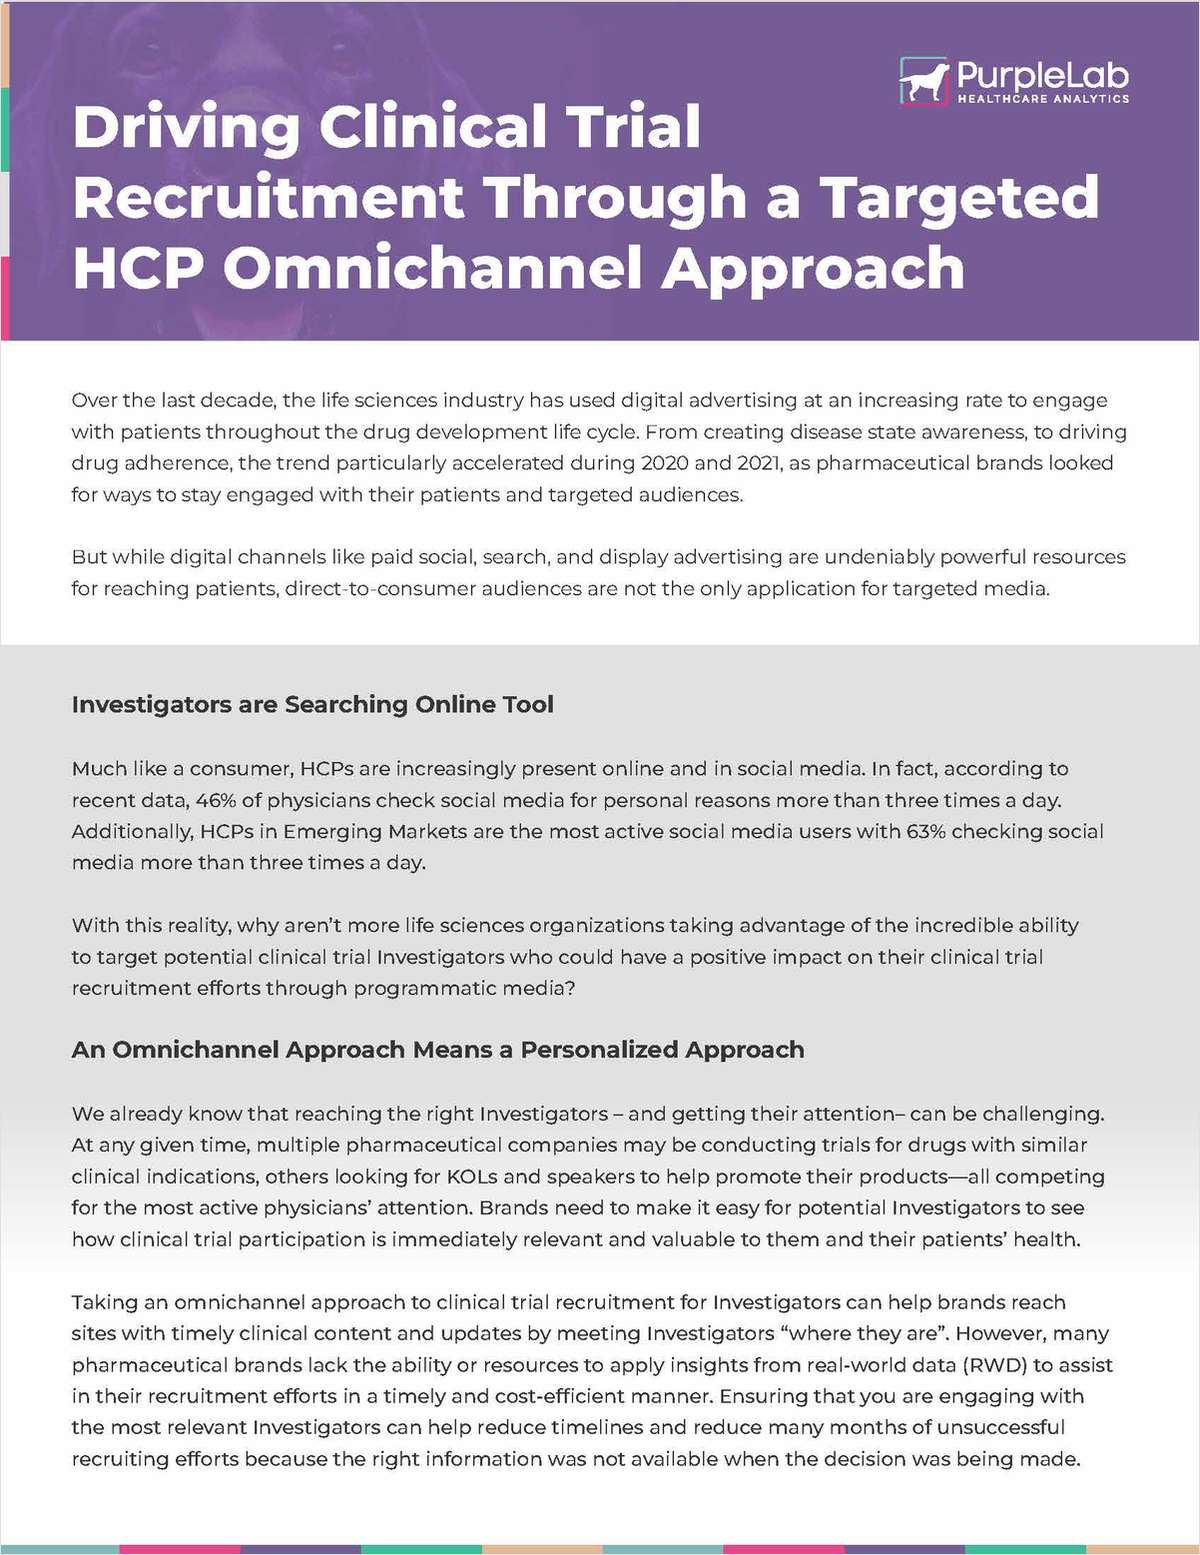 Driving Clinical Trial Recruitment Through a Targeted HCP Omnichannel Approach